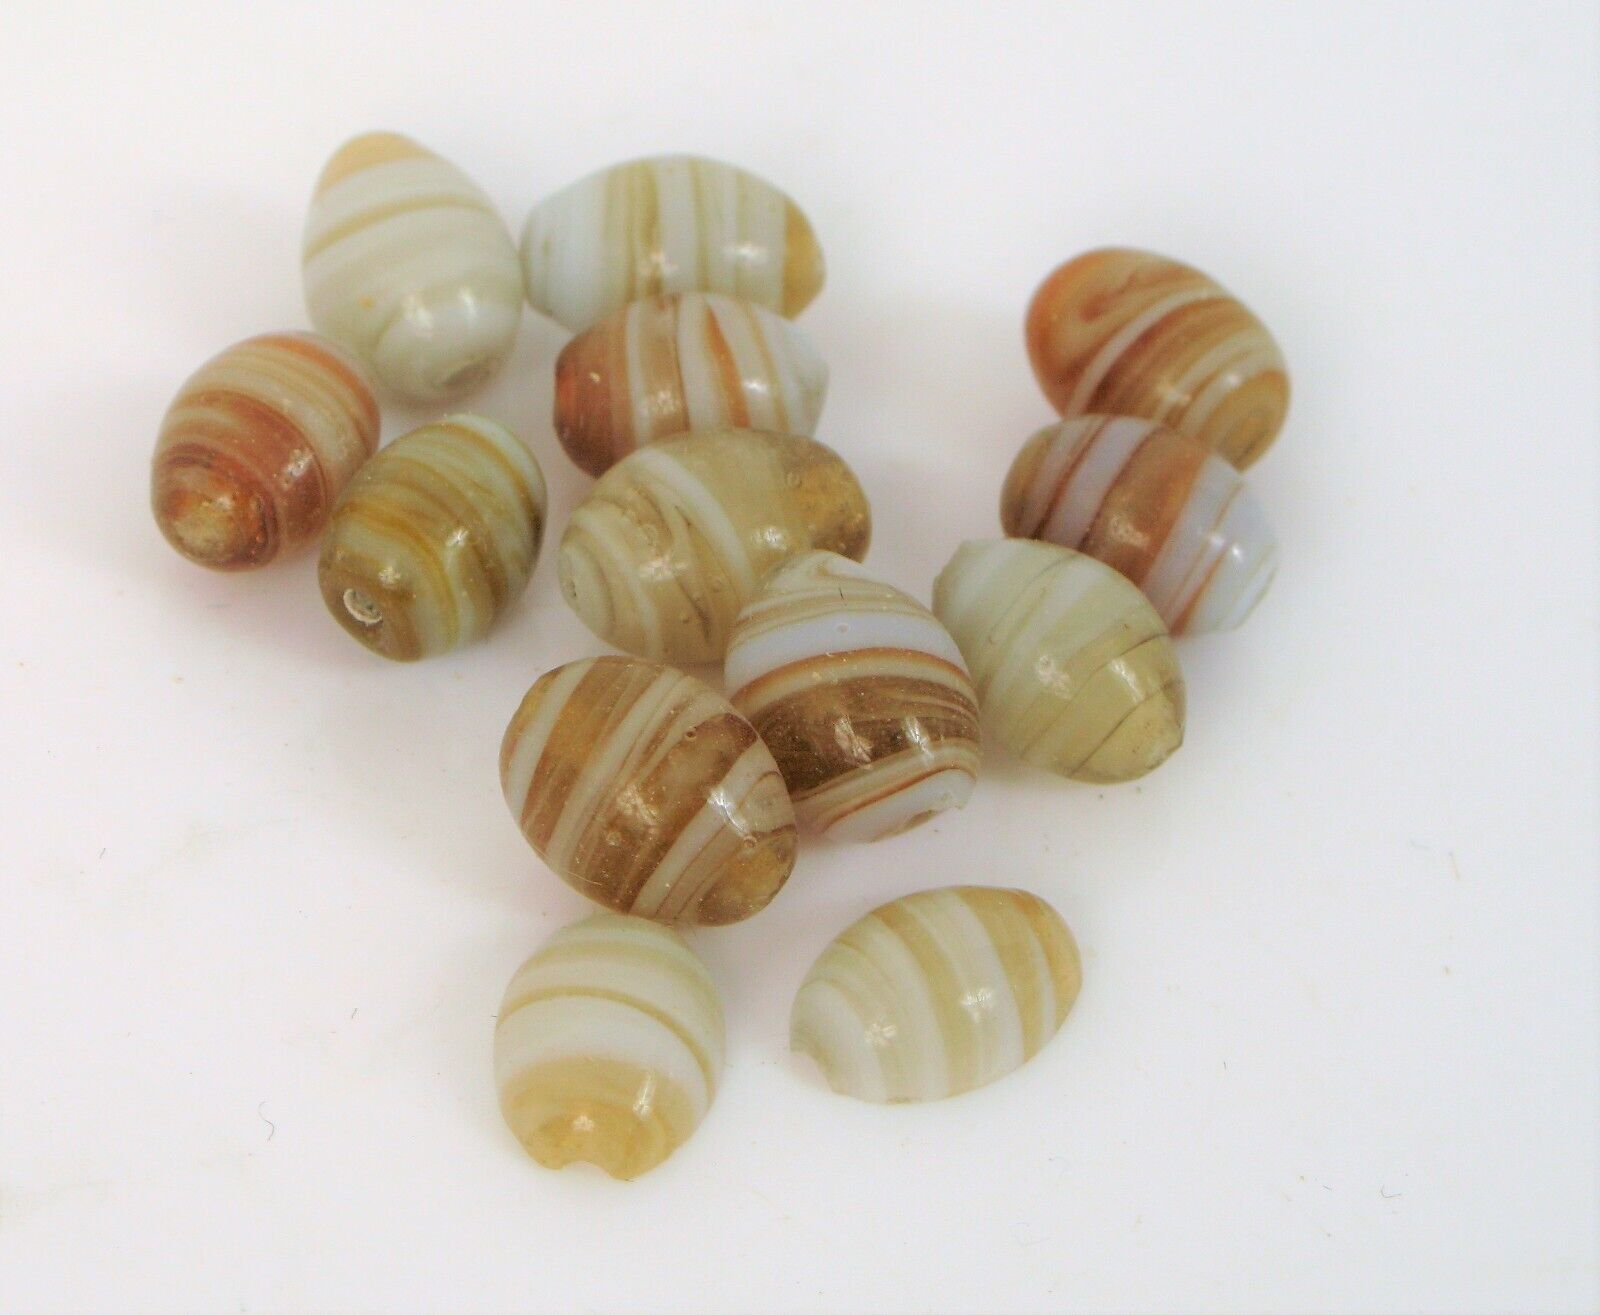 ANTIQUE HAND MADE GLASS STRIPED BEADS FOR NECKLACE OR BRACELET GERMAN ? DAINTY